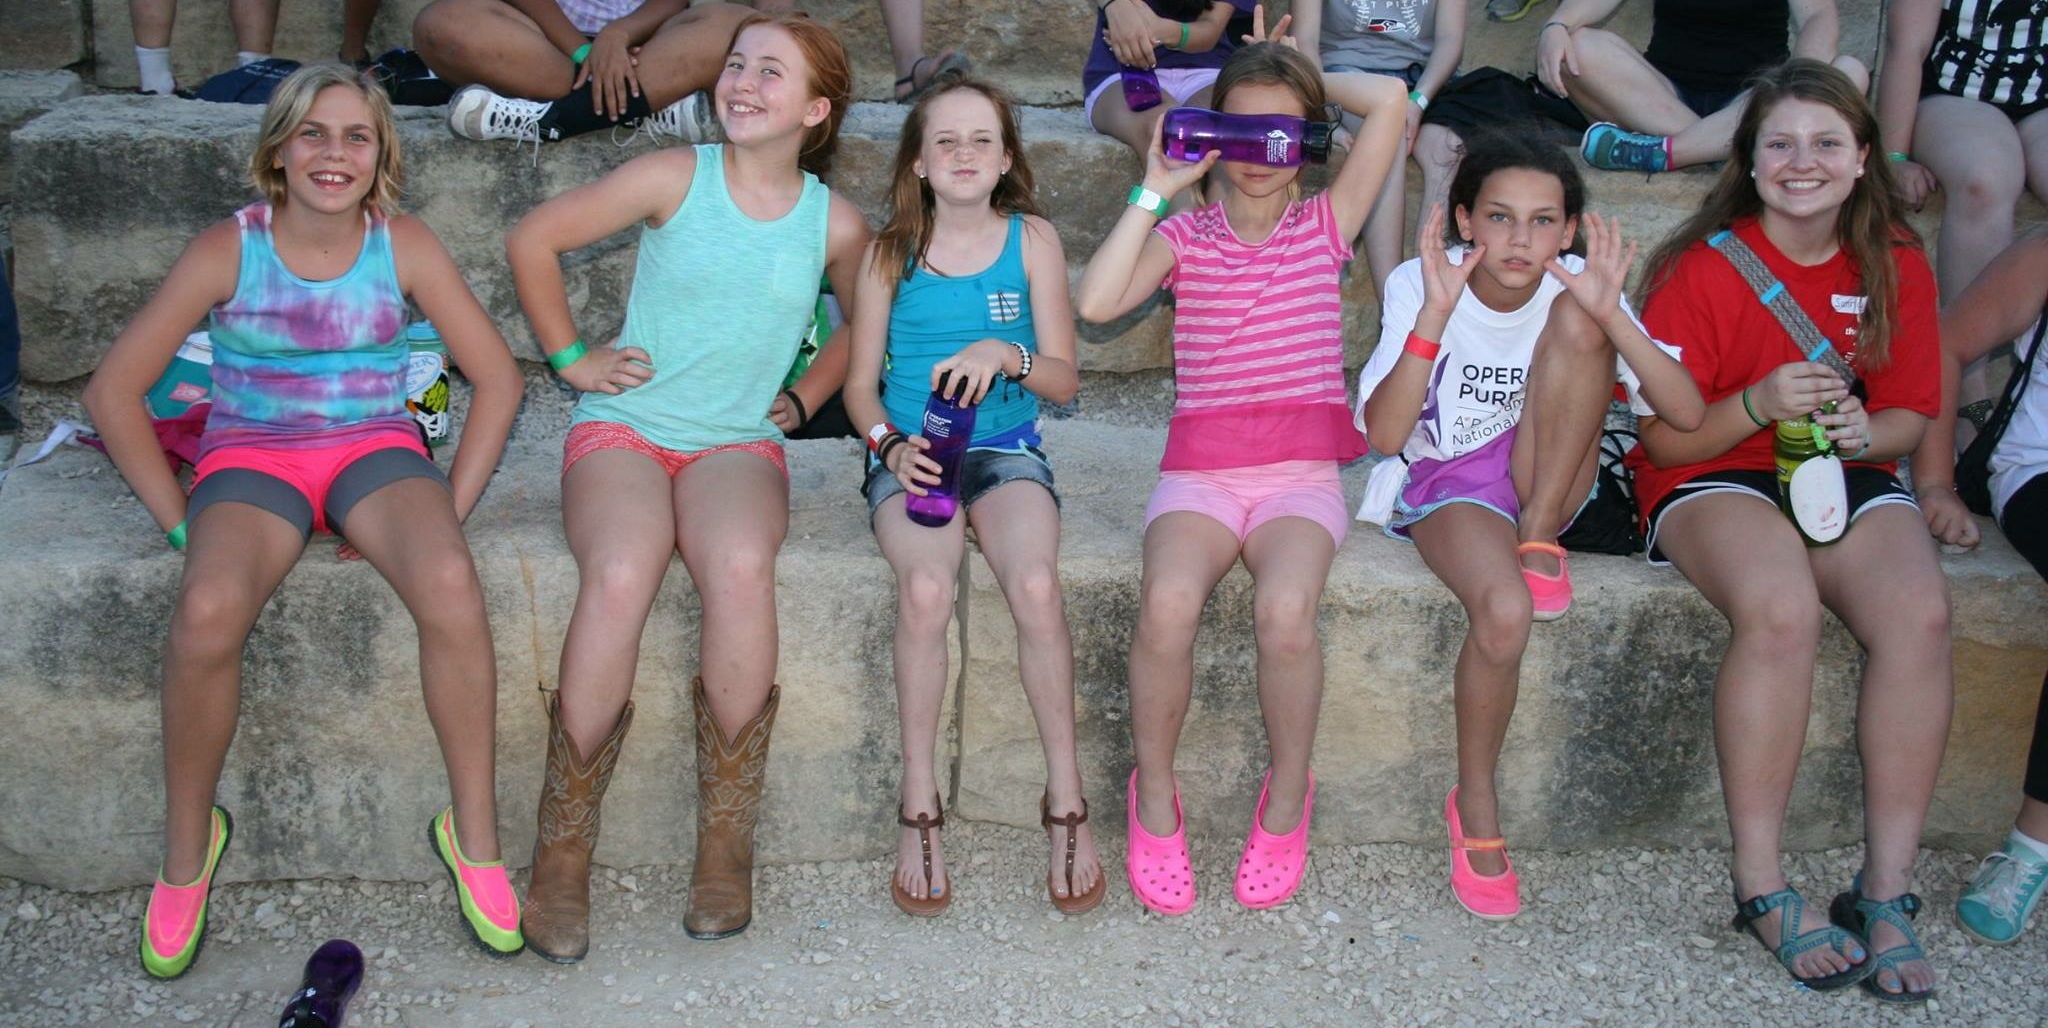 Lucia (2nd from left) and her cabin mates waiting for evening campfire to start.